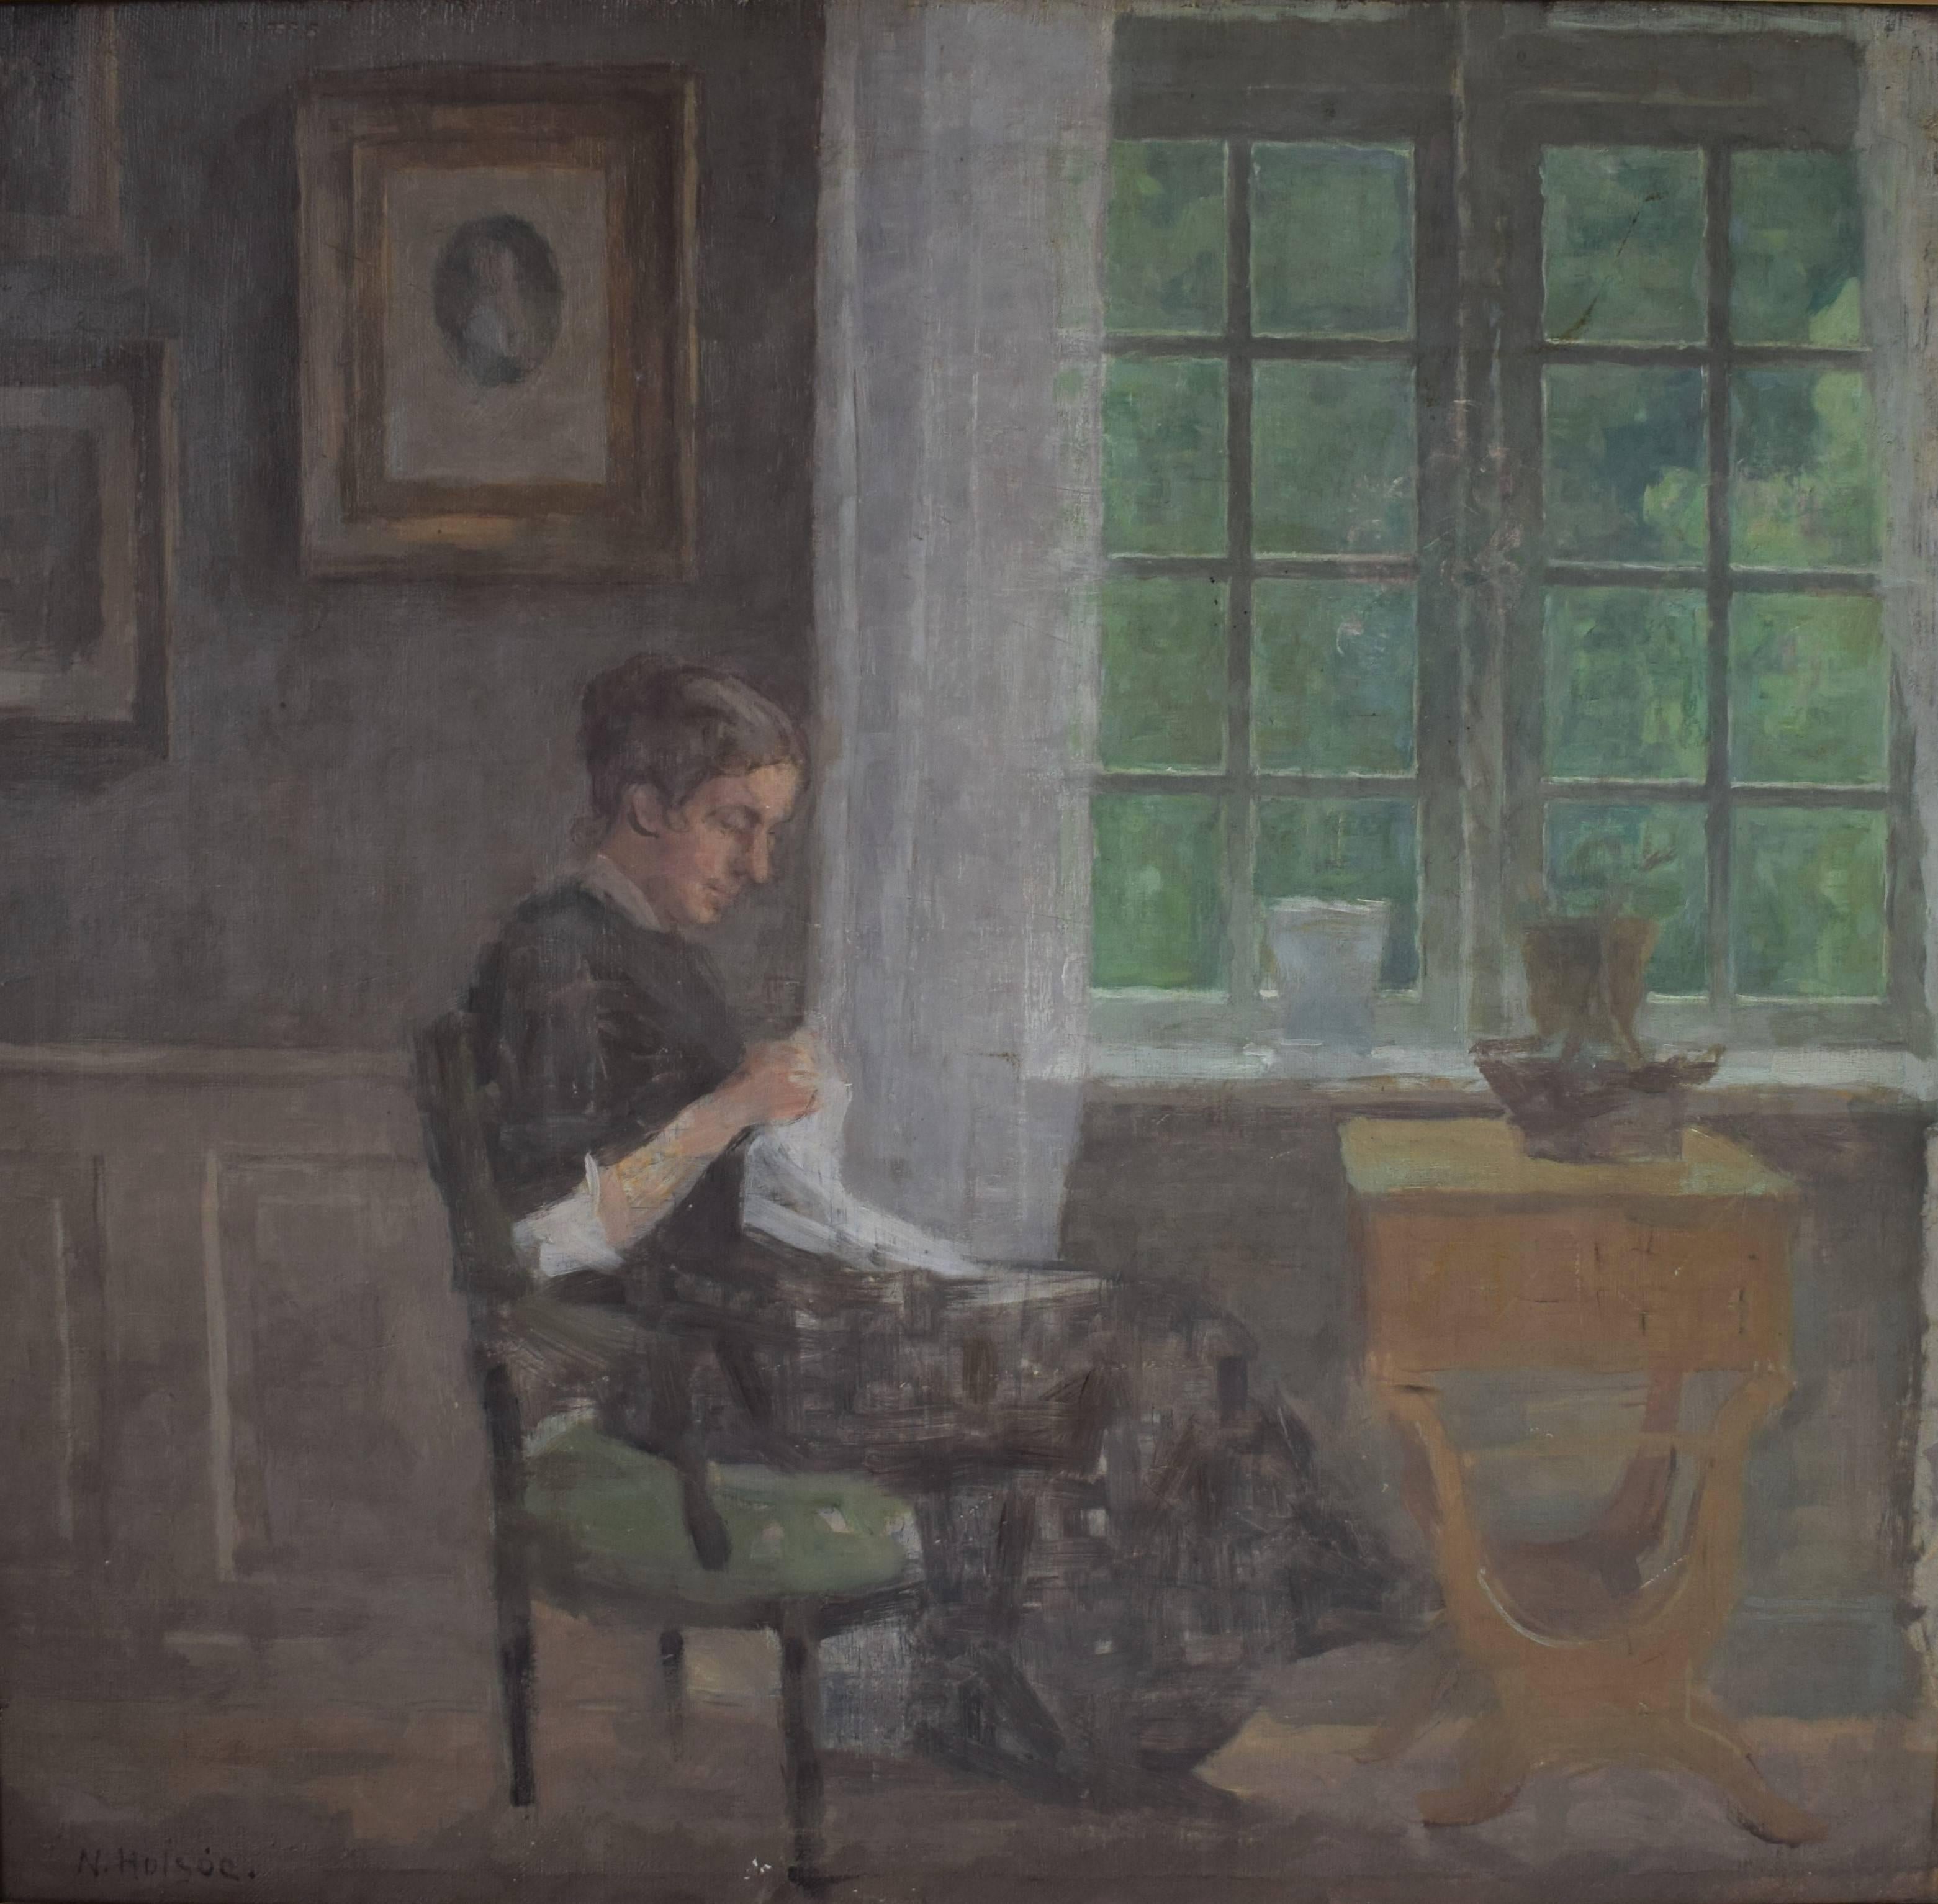 Interior with sewing woman sitting by the window by the Danish painter Niels Holsøe (1865 - 1928). Oil on canvas. Signed: N. Holsøe
Dimensions: inches 21.3 H x inches 22.1 W x inches 2 D / cm 54 H x cm 56 W x cm 5 D.